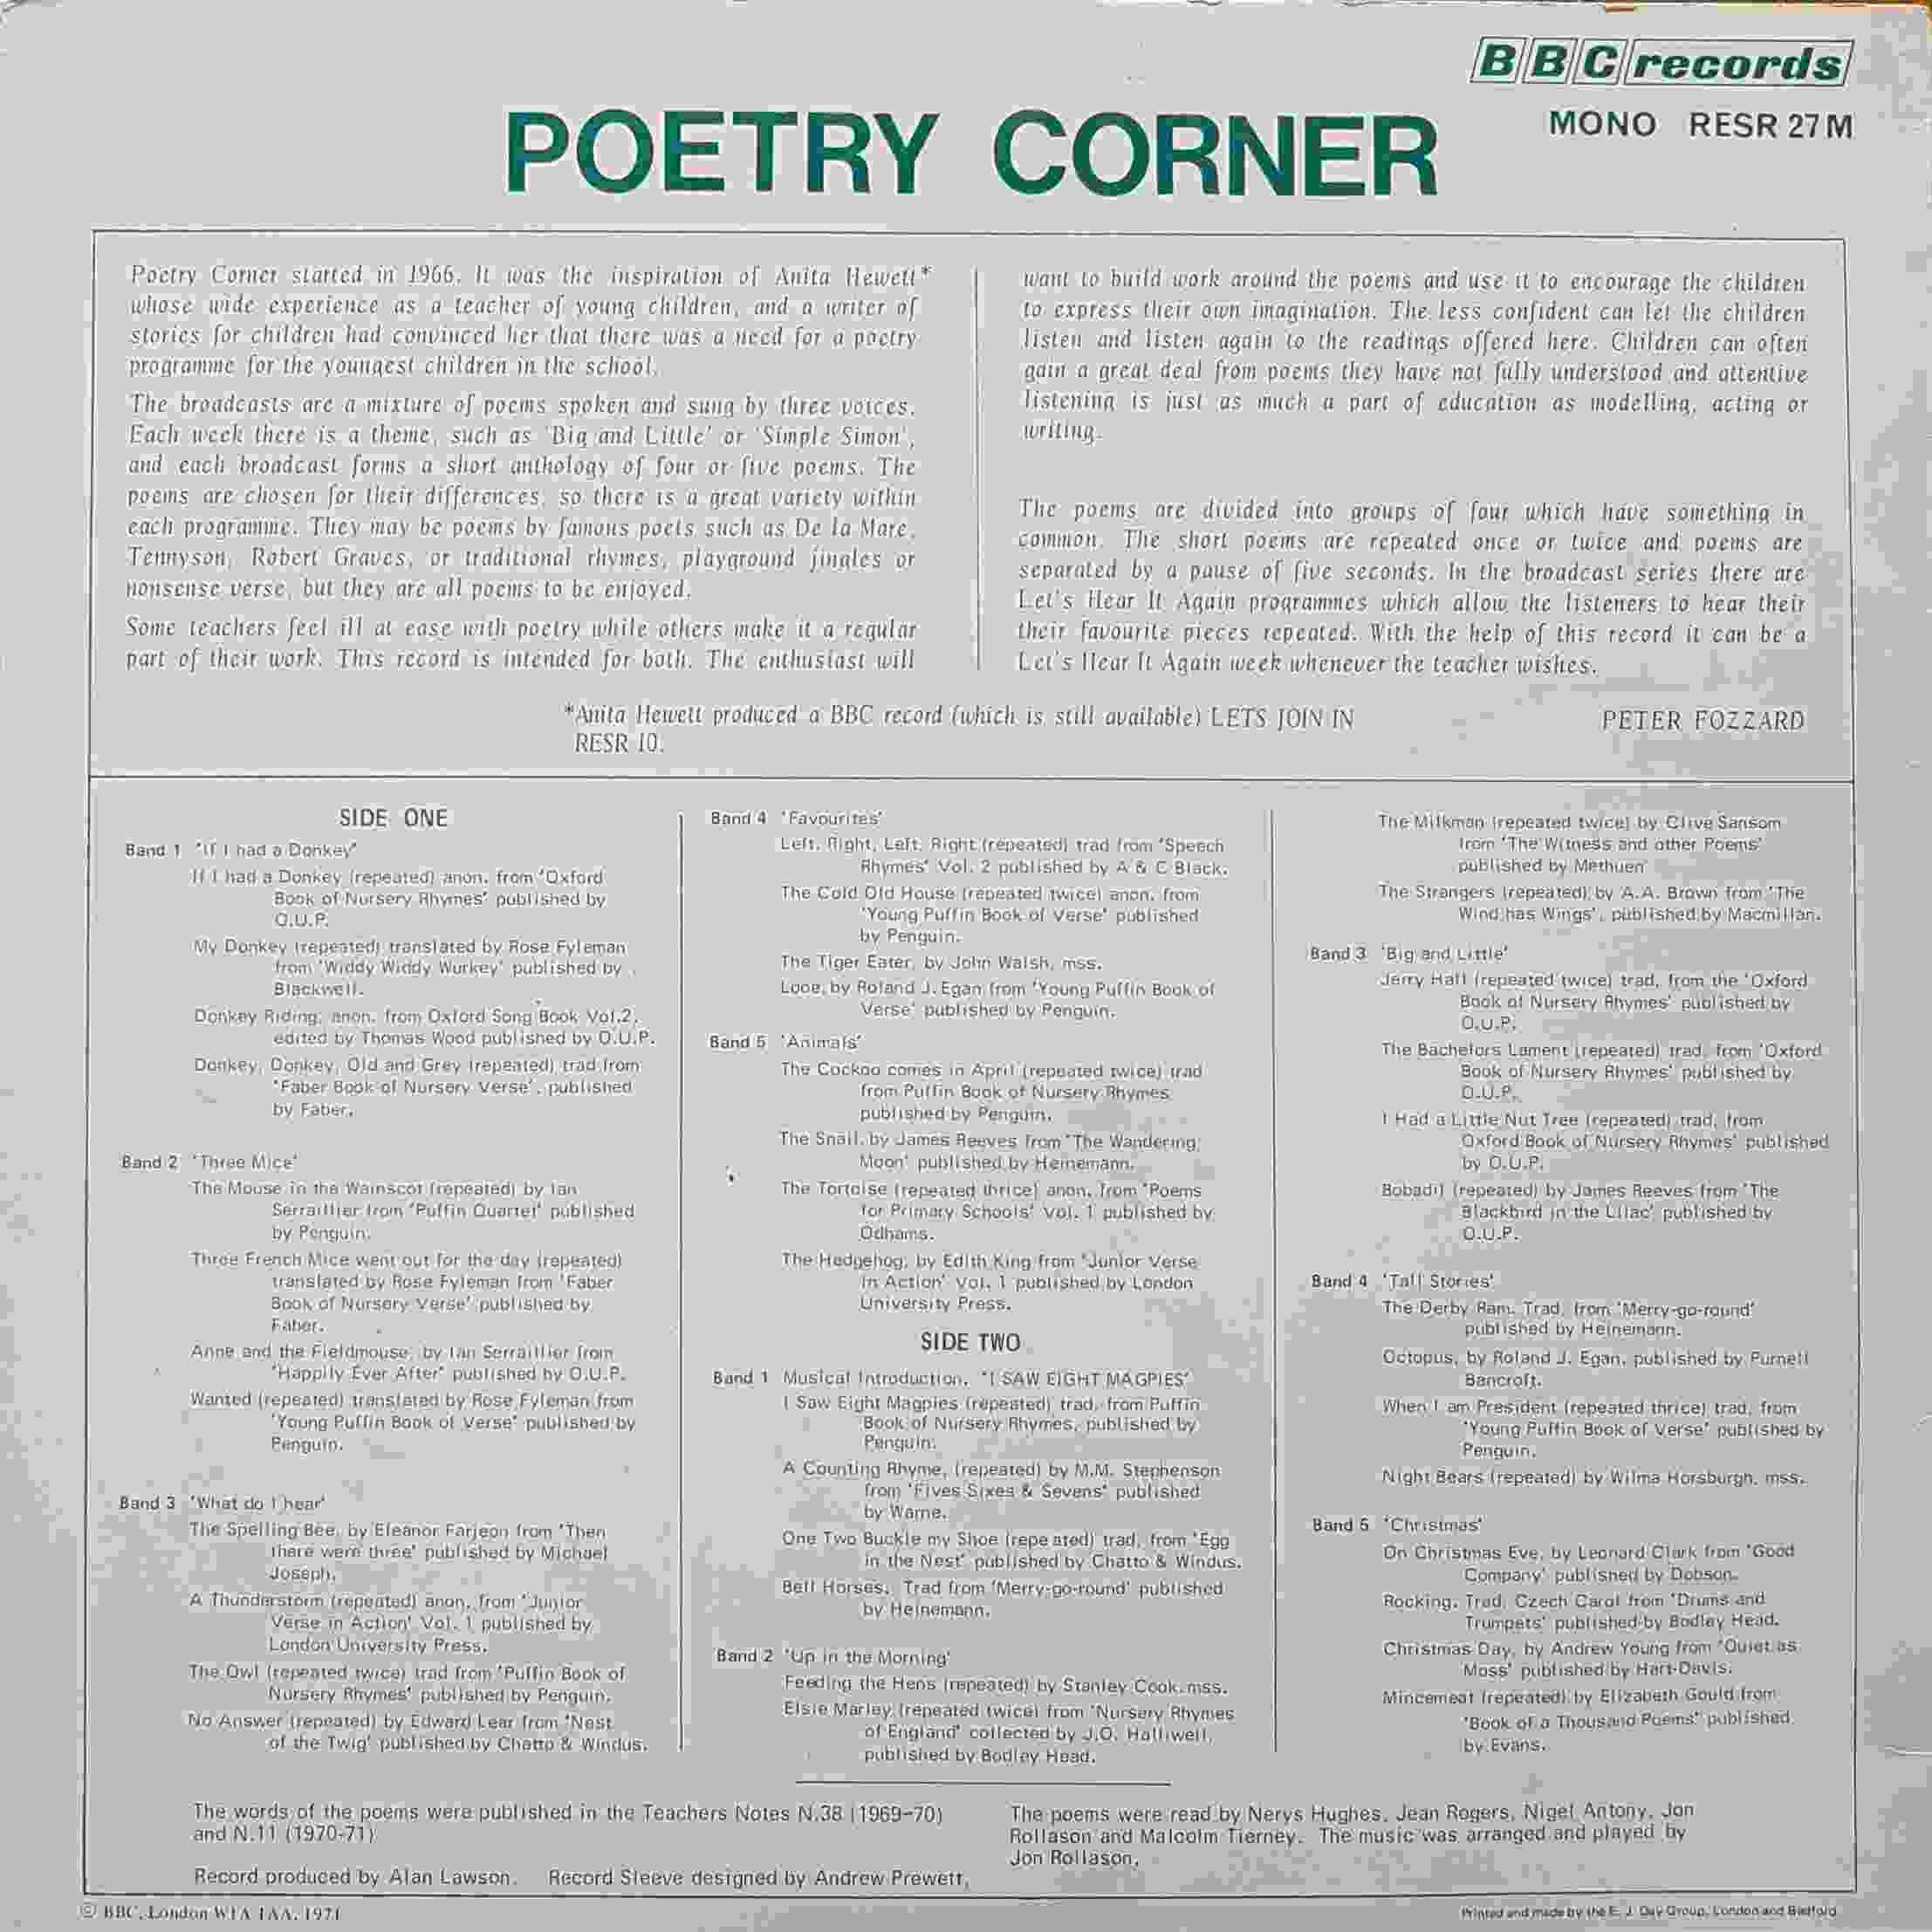 Picture of RESR 27 Poetry corner by artist Various from the BBC records and Tapes library